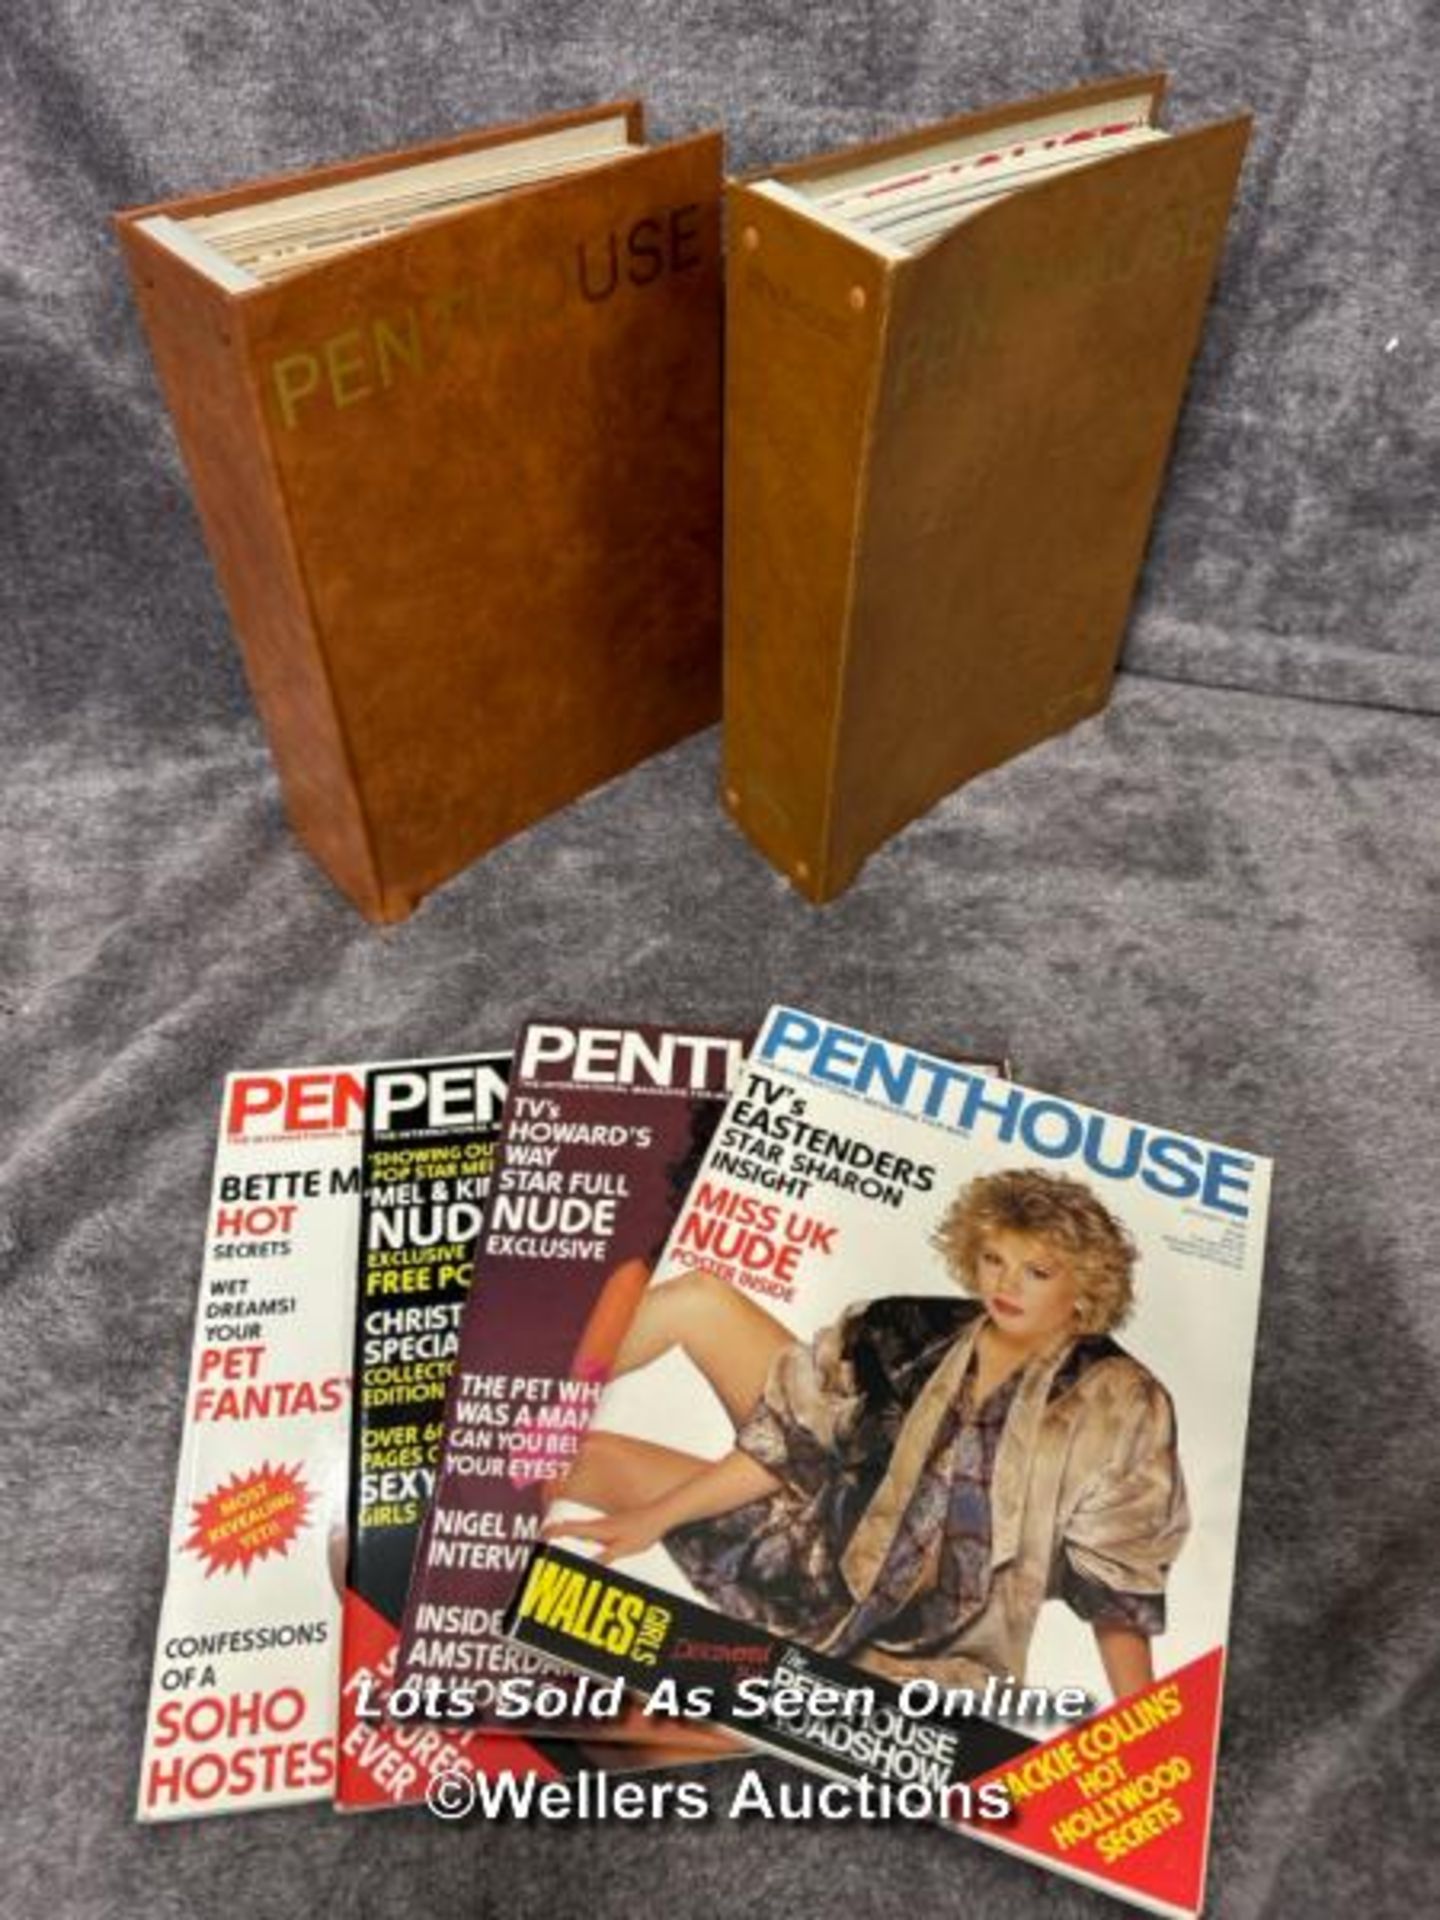 twenty two vintage 1980's Penthouse magazines with two binders, incomplete volumes from 1985, 1986